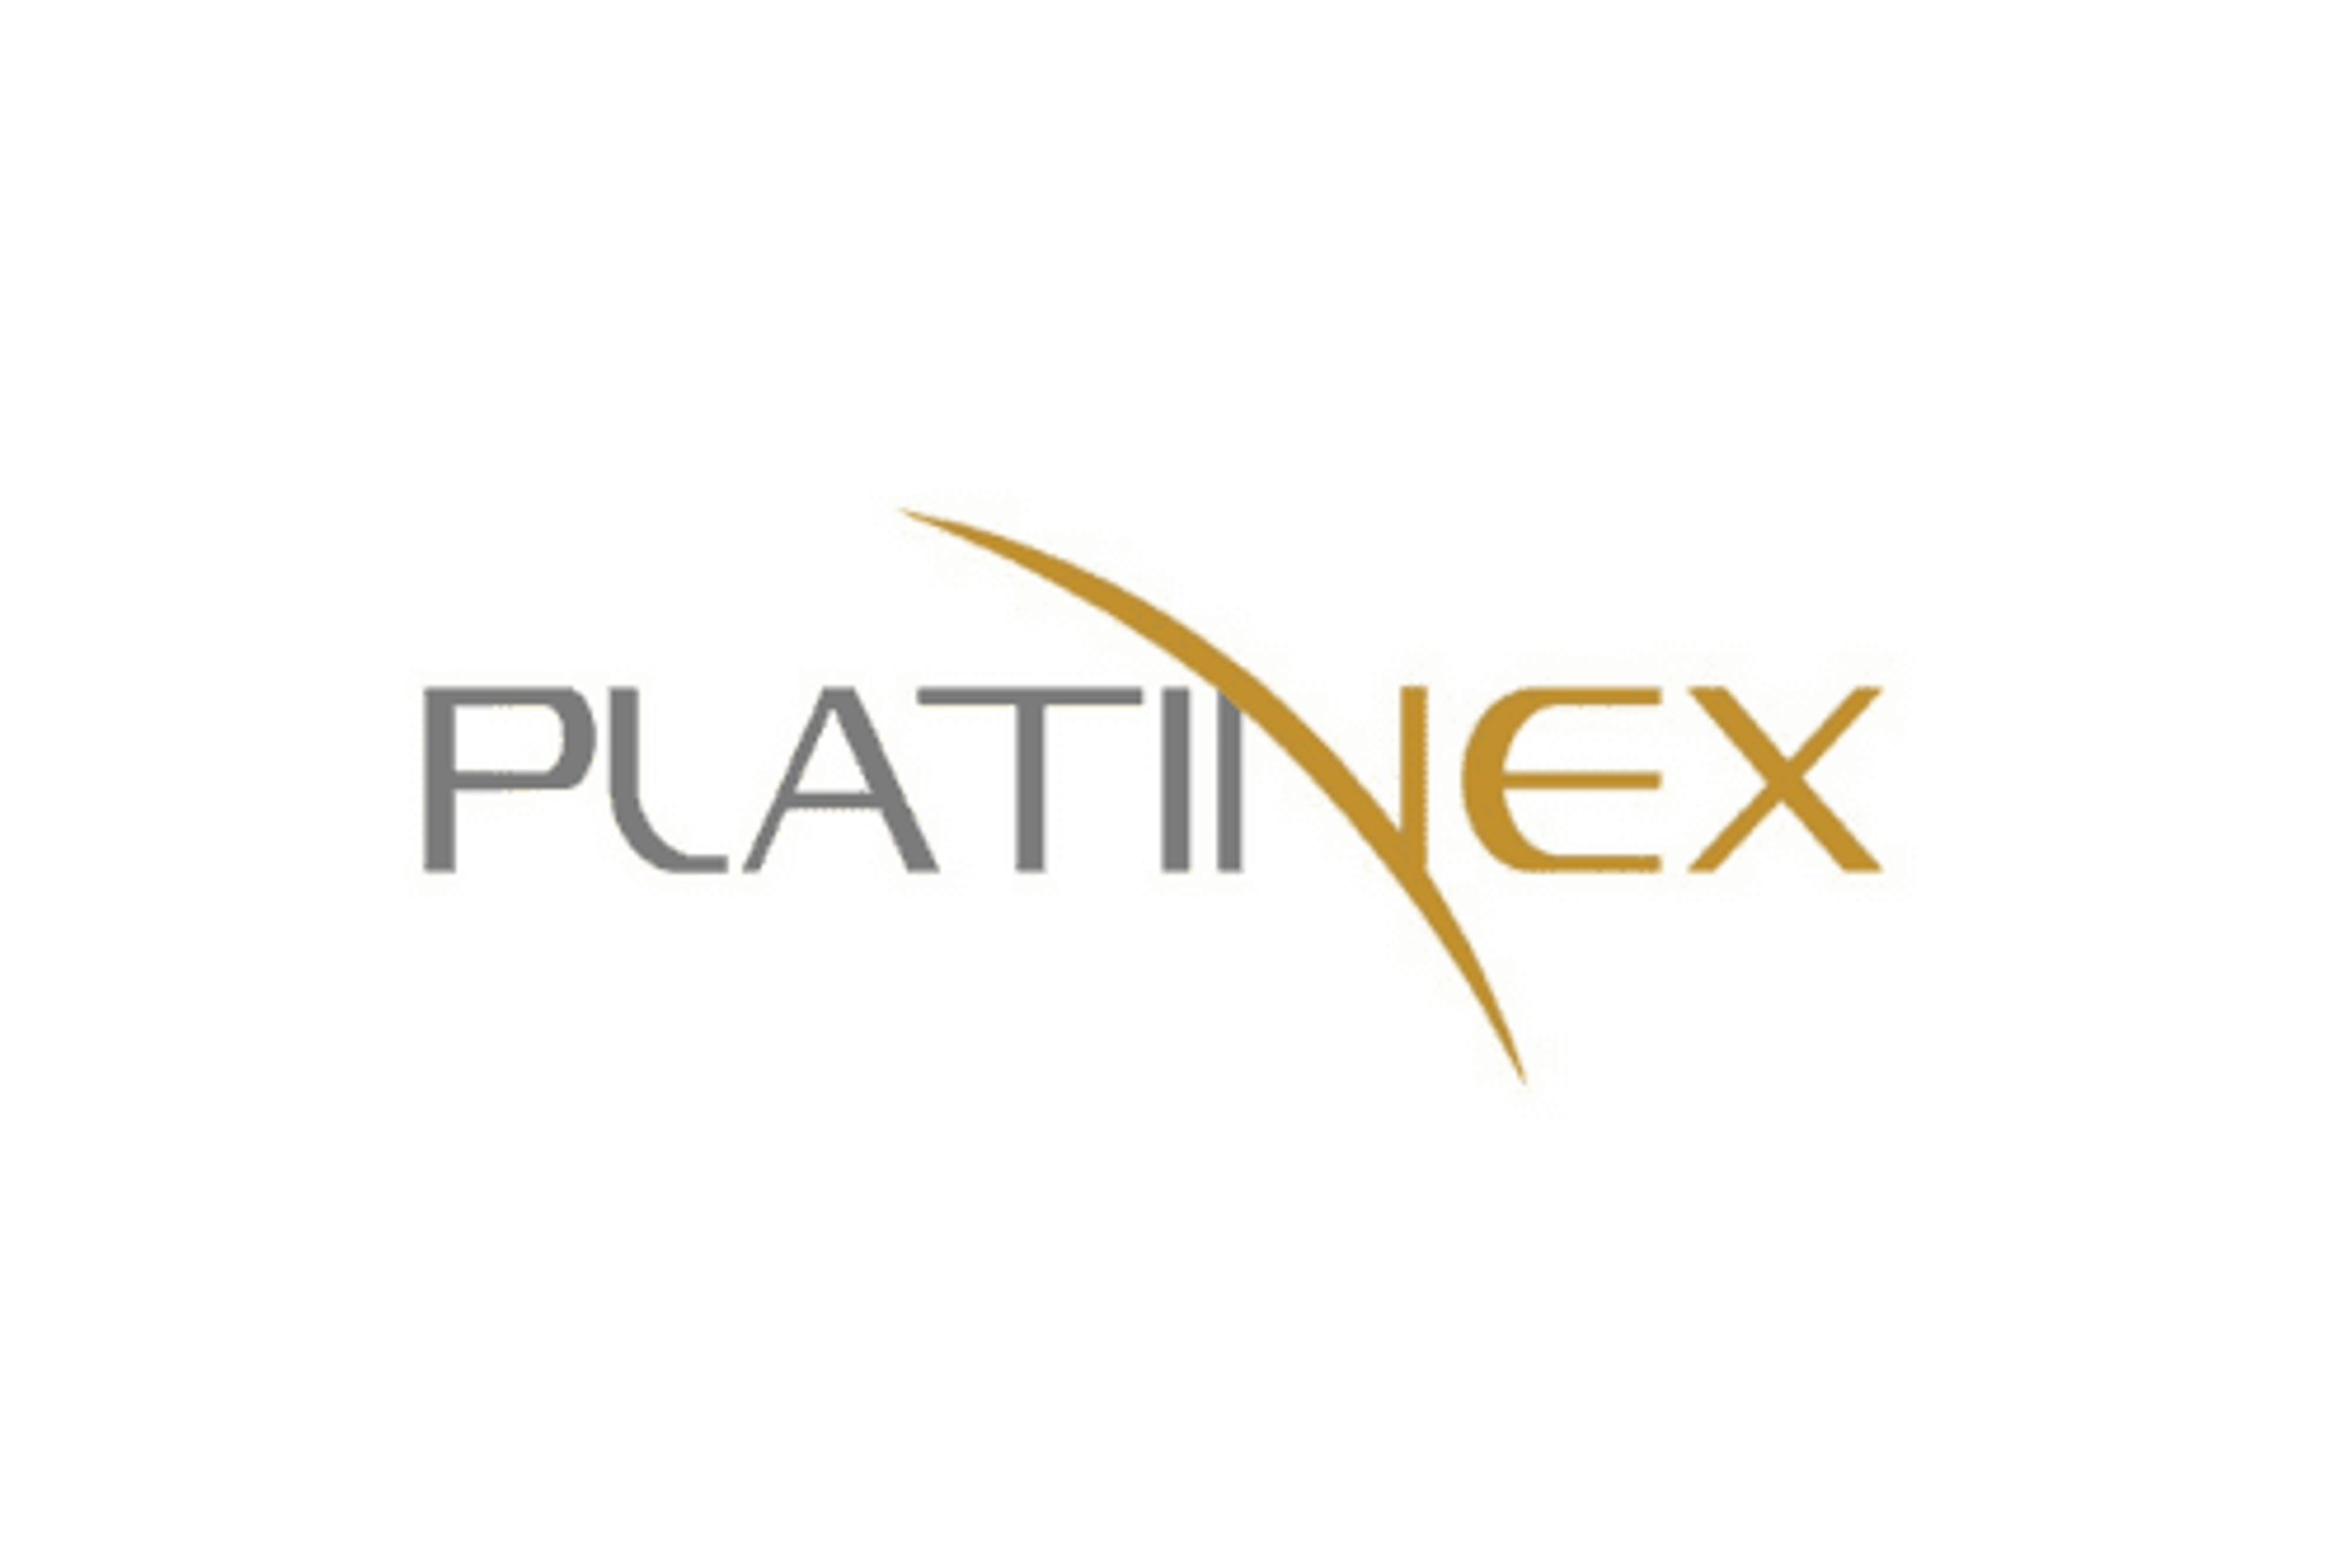 InvestmentPitch Media Video Discusses Platinex's Acquisition of the W2 Copper-Nickel-PGE Project Near Ring of Fire, Northwestern Ontario - Video Available on Investmentpitch.com